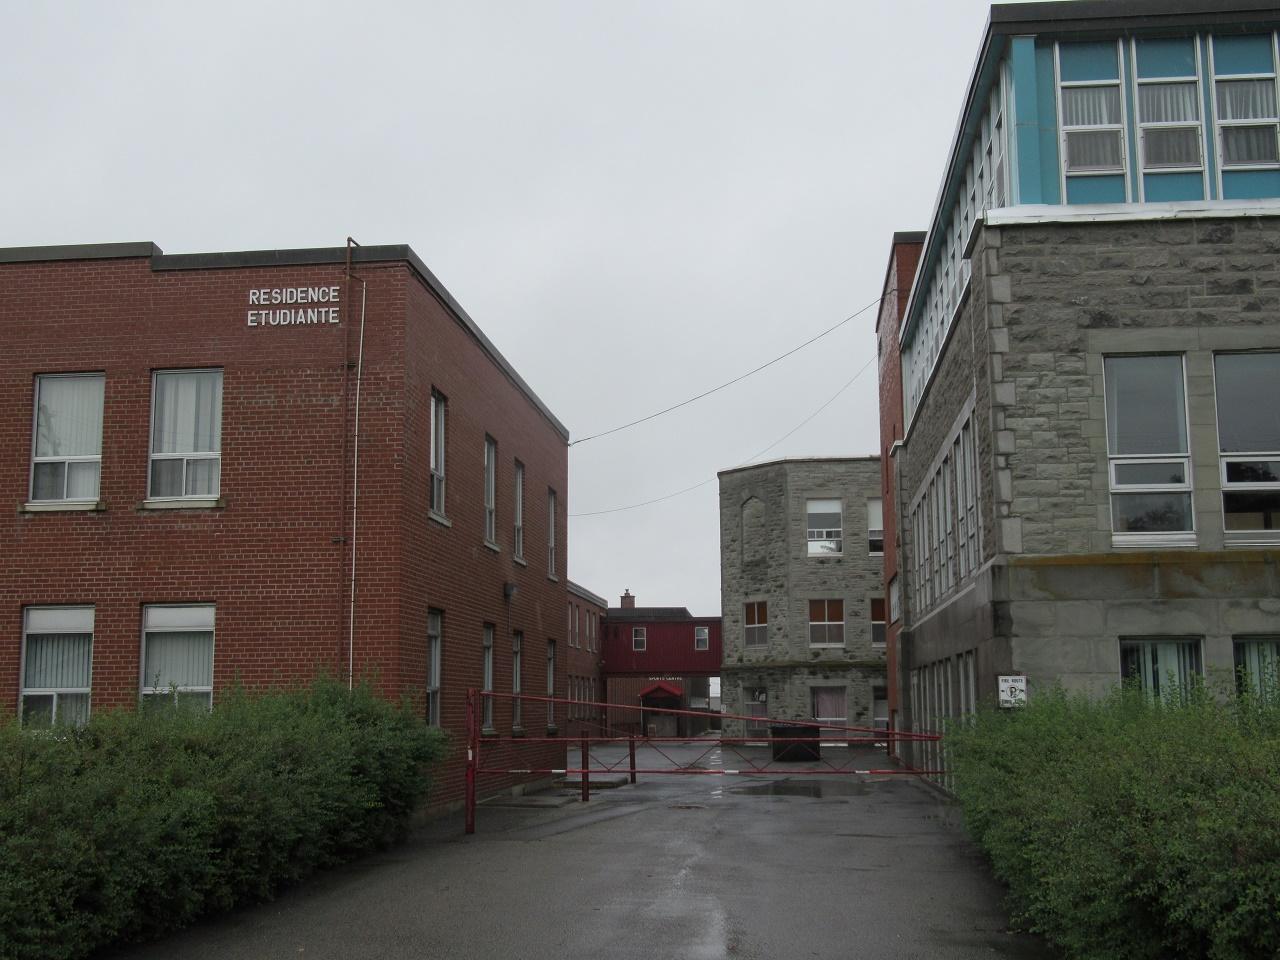 Future still unknown for Alfred campus buildings